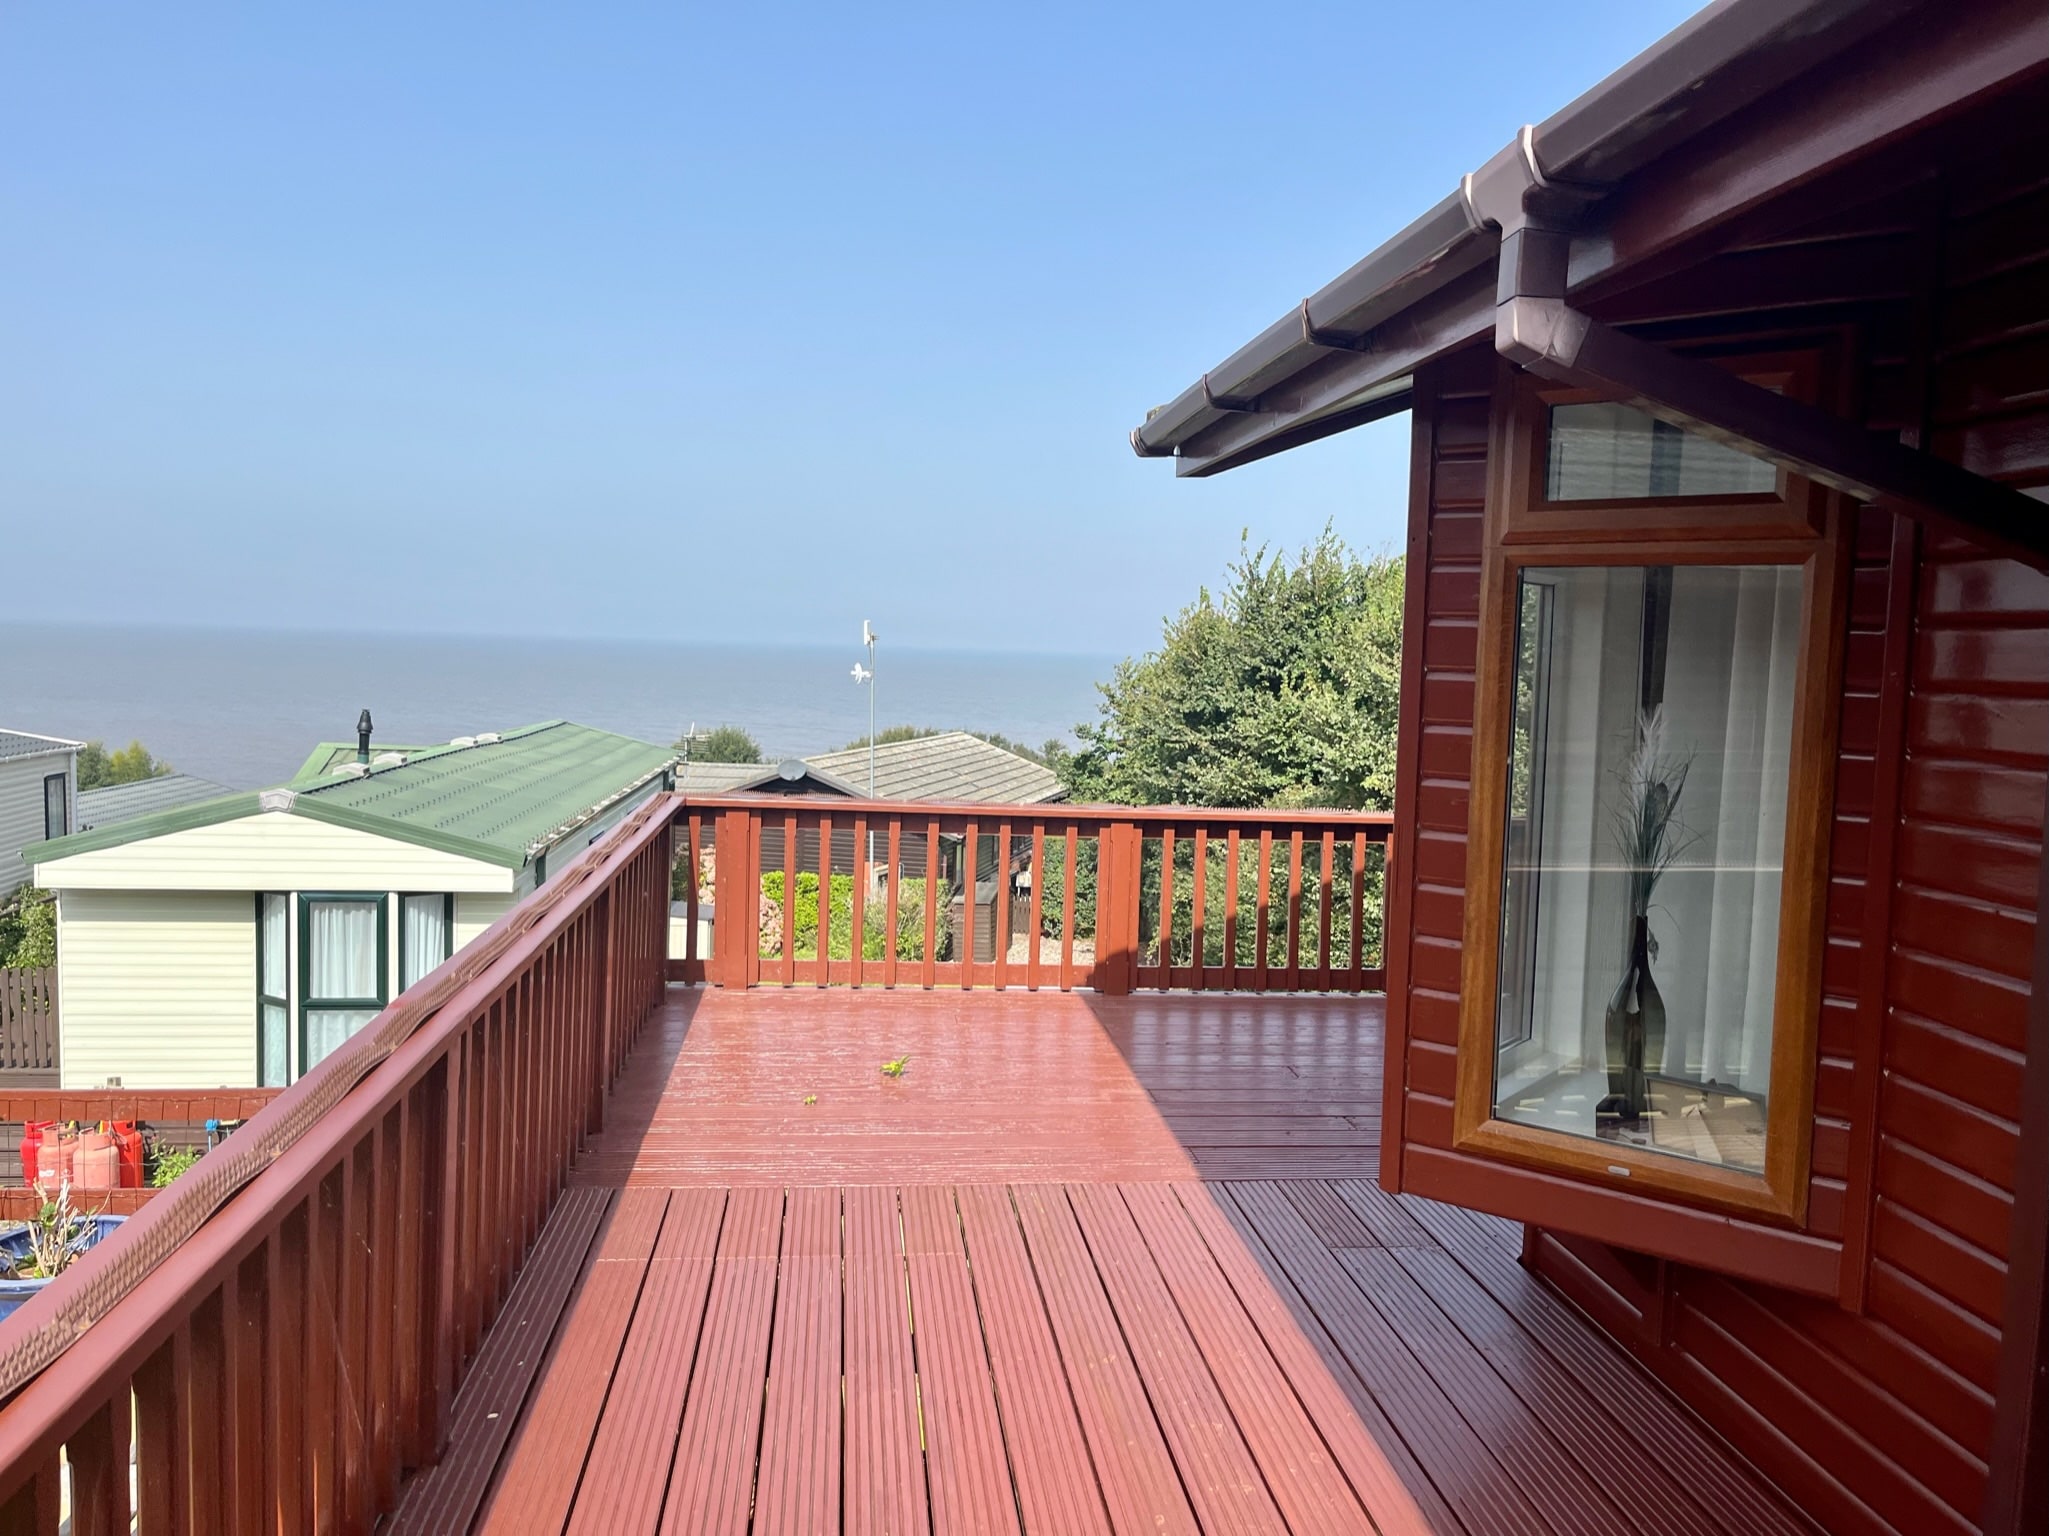 Luxury lodge for sale at St Audries Bay Holiday Club, Somerset